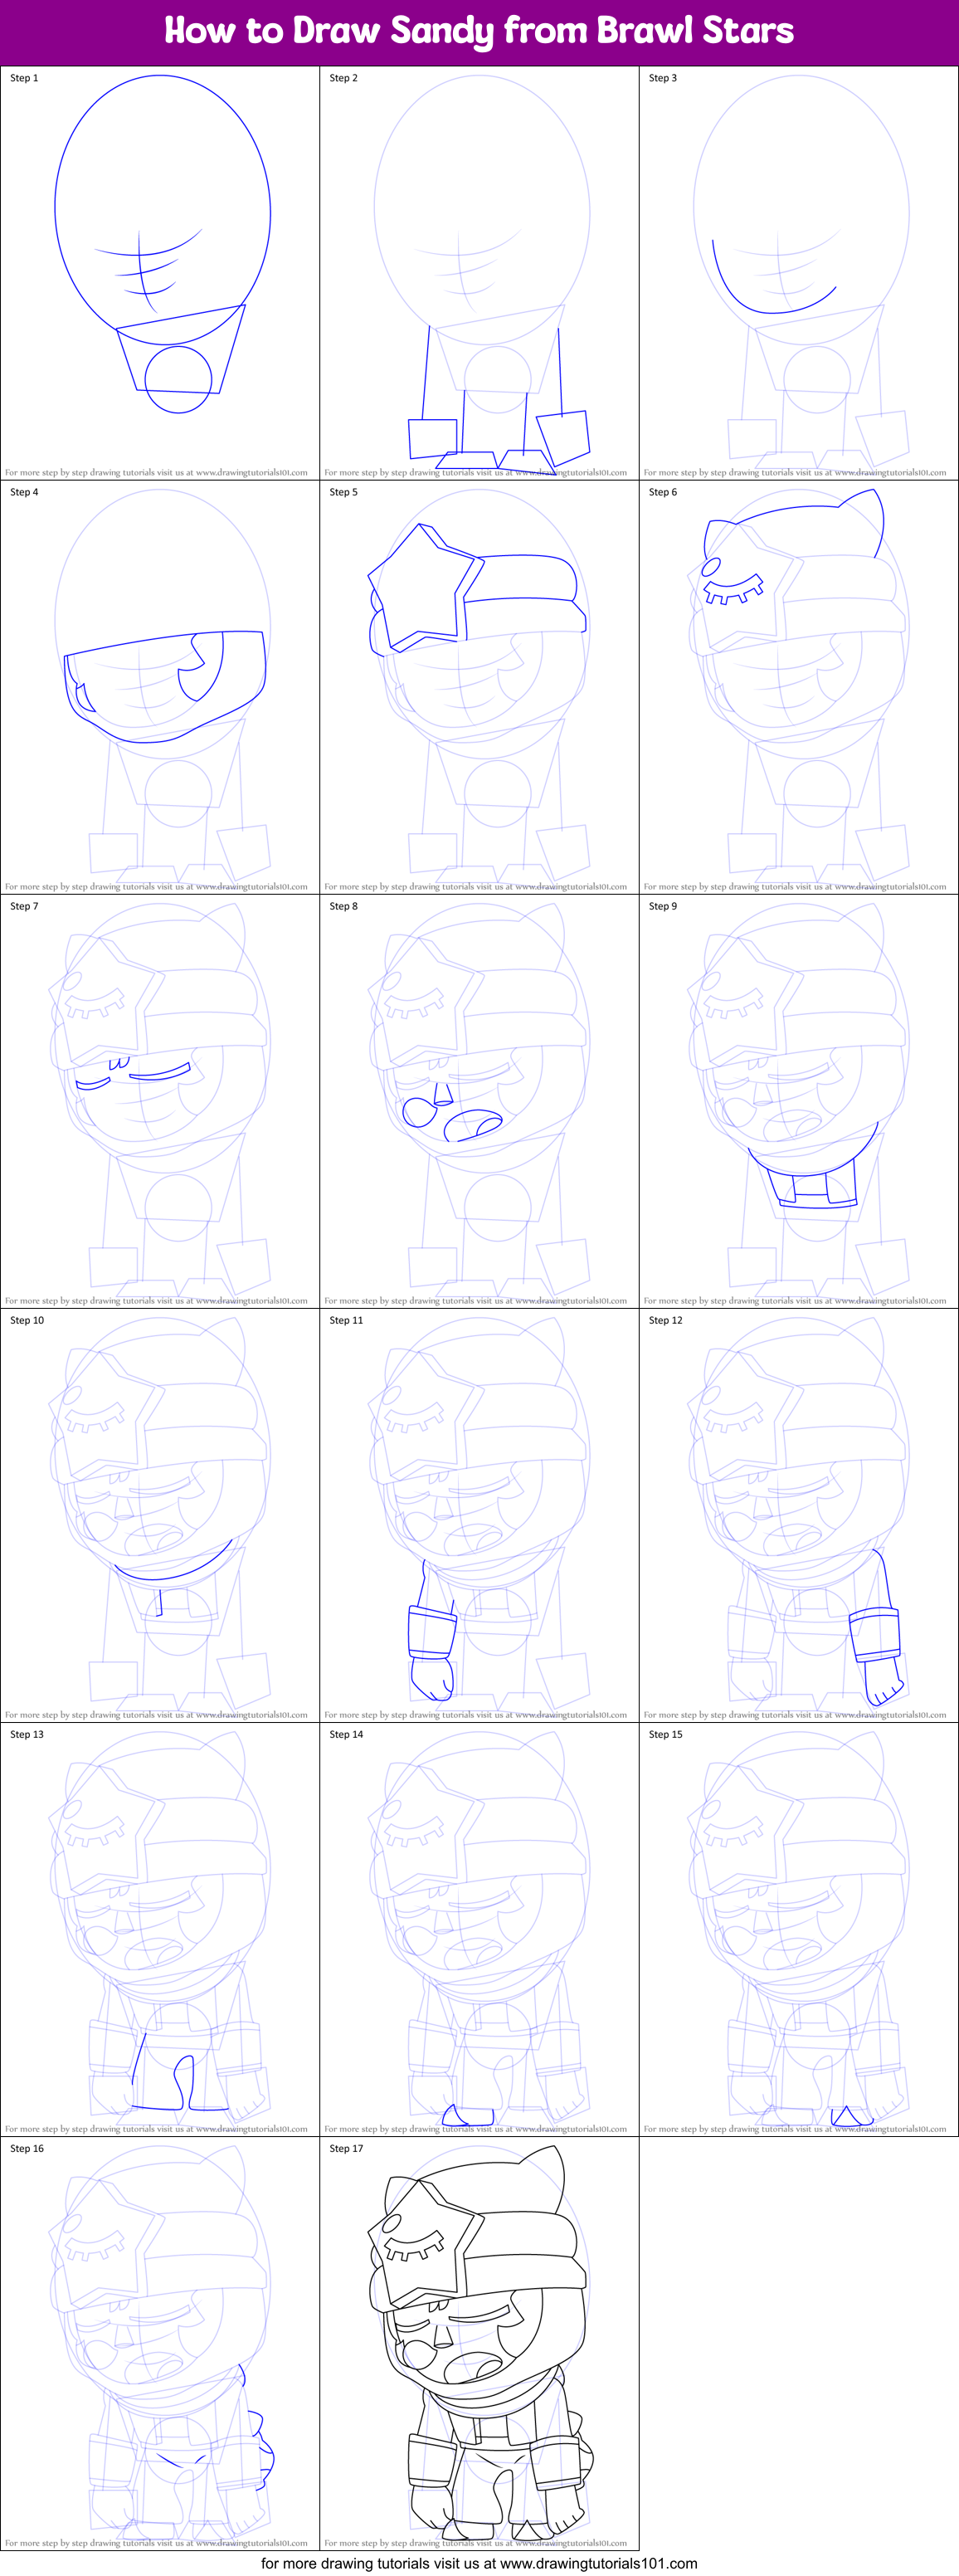 How To Draw Sandy From Brawl Stars Printable Step By Step Drawing Sheet Drawingtutorials101 Com - brawl stars sandy outline